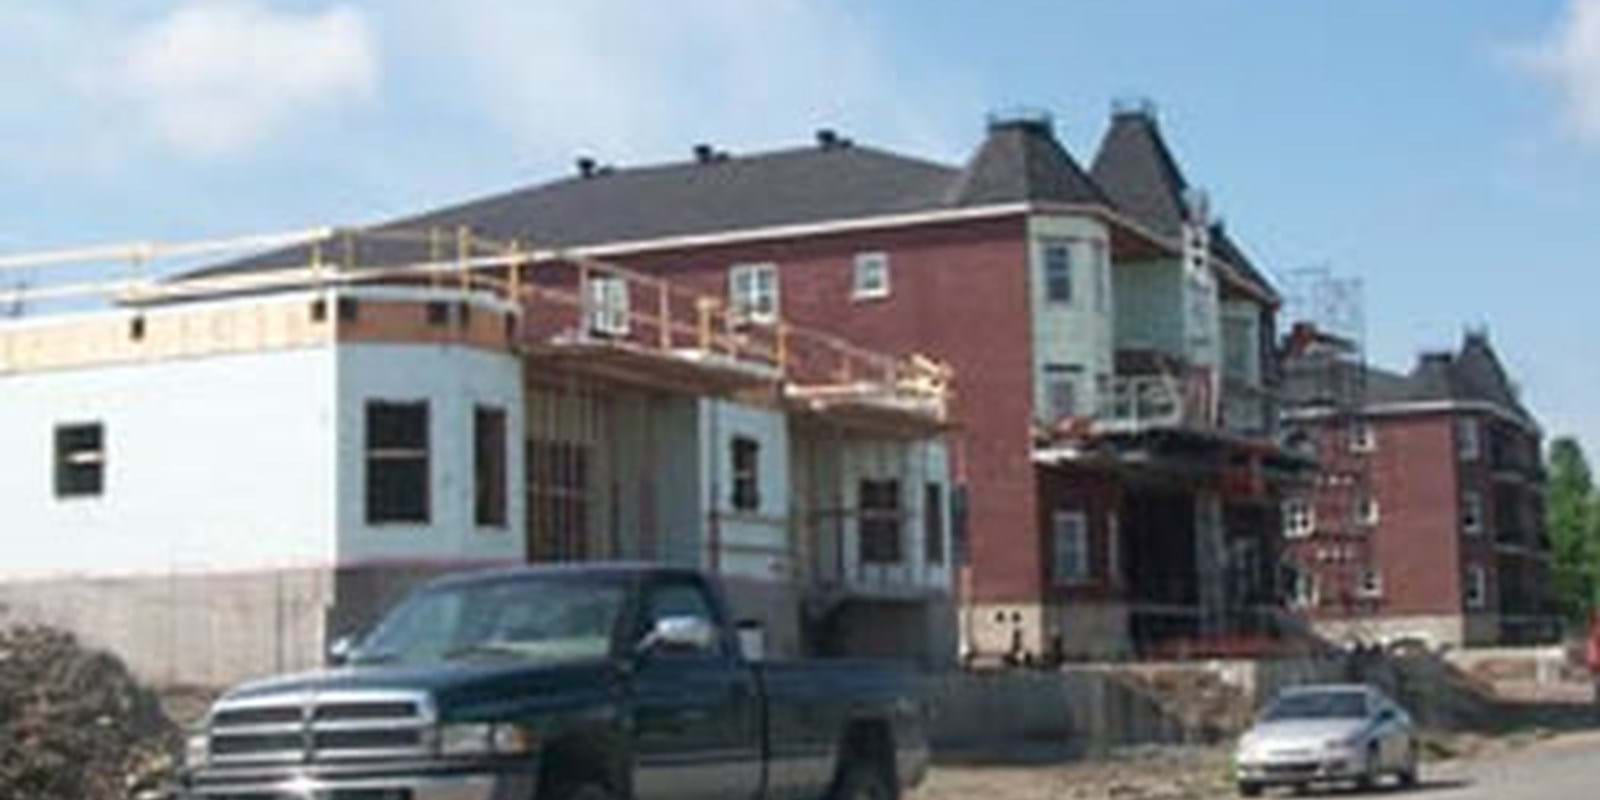 The value of building permits declined in July